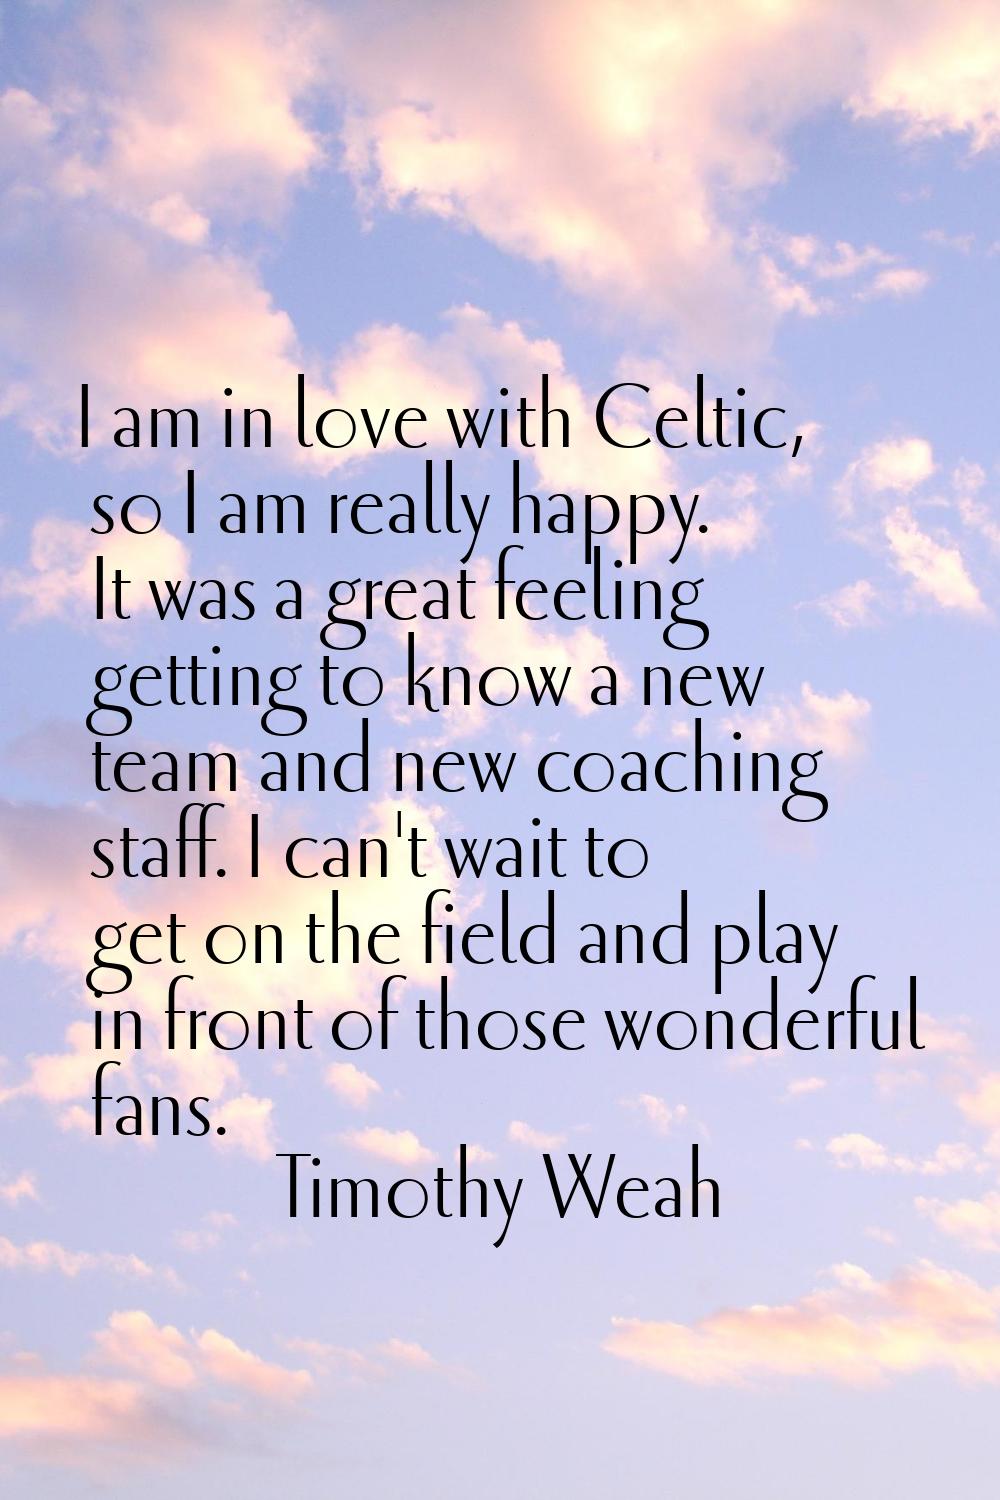 I am in love with Celtic, so I am really happy. It was a great feeling getting to know a new team a